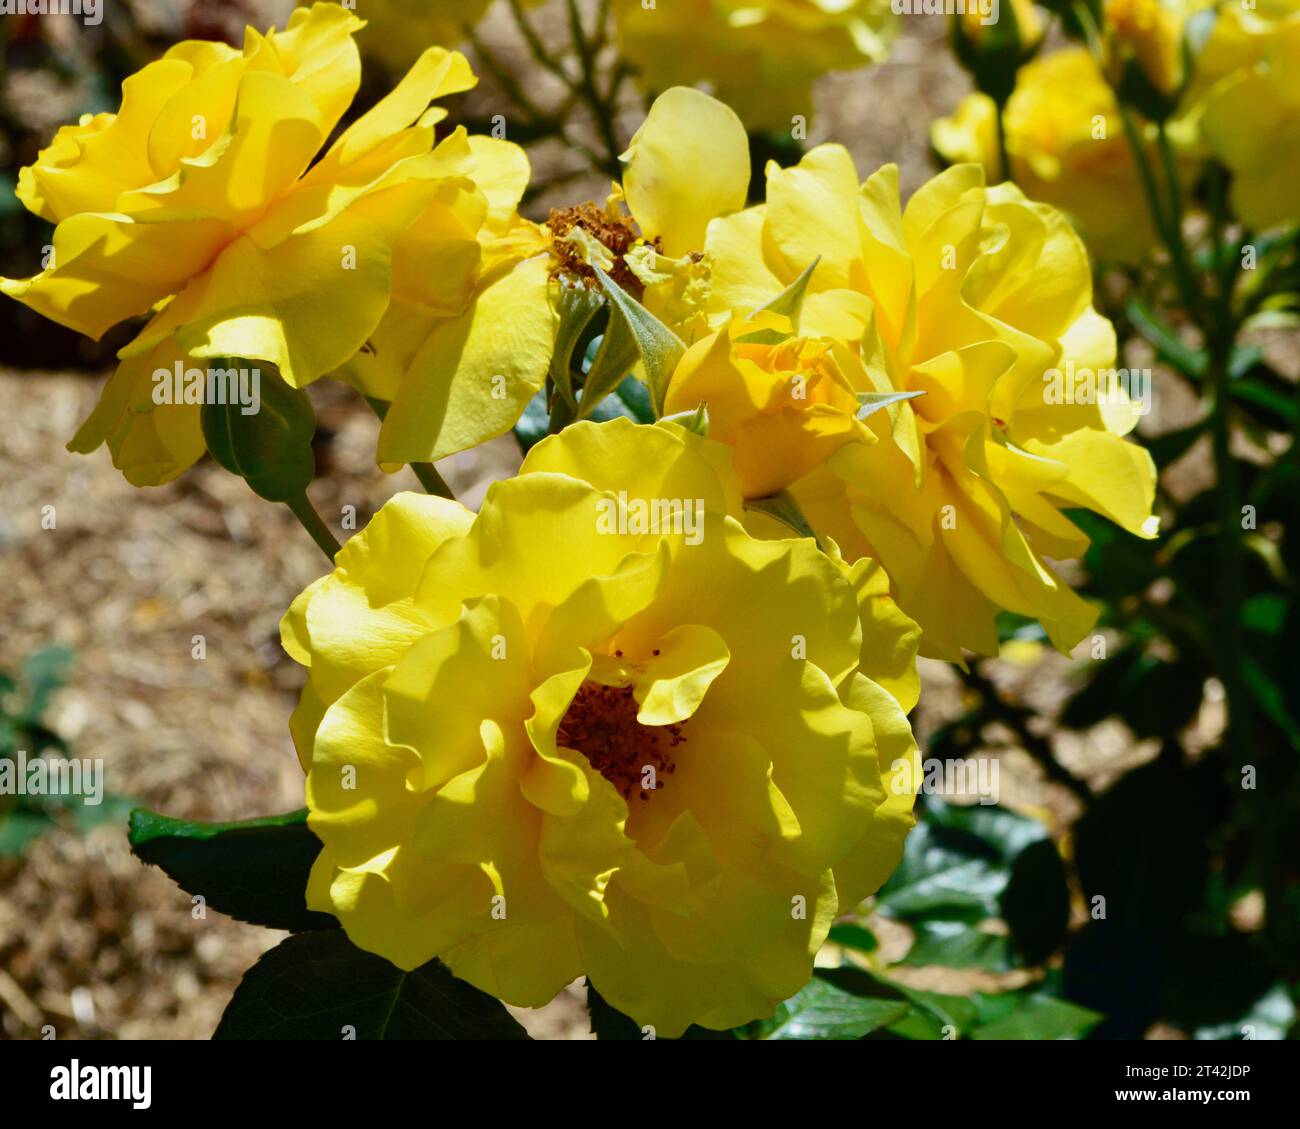 A bright yellow rose in a sunny garden Stock Photo